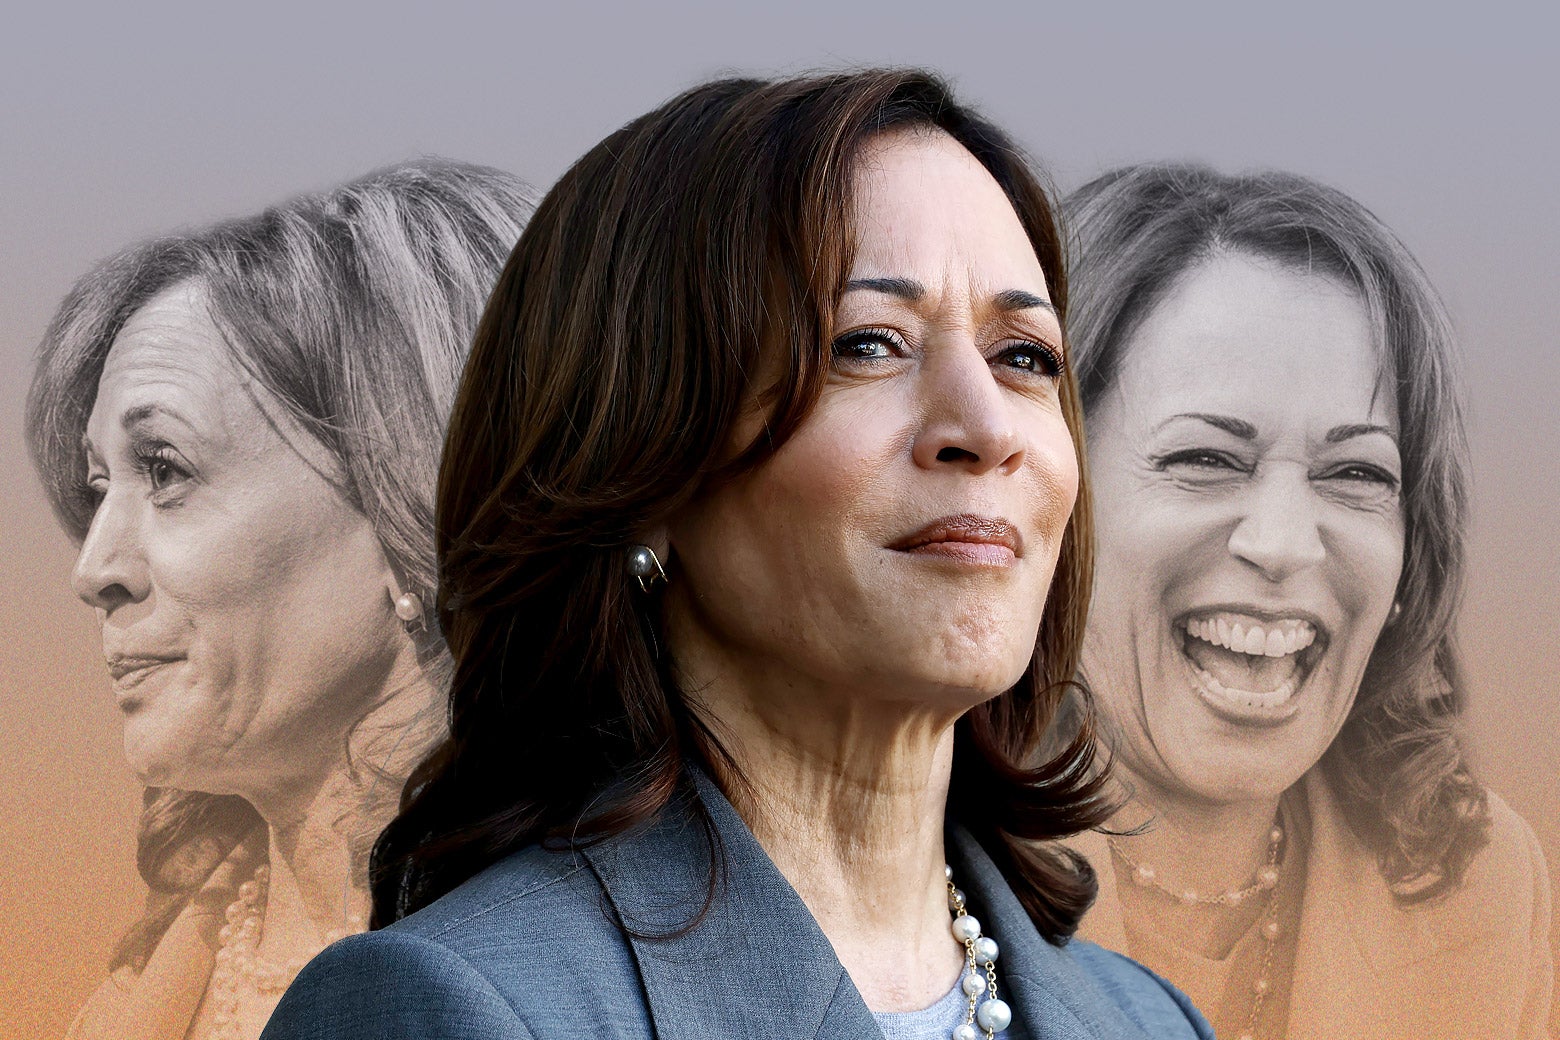 America Spent Years Turning Kamala Harris Into a Joke. In the End, She Might Get the Last Laugh.